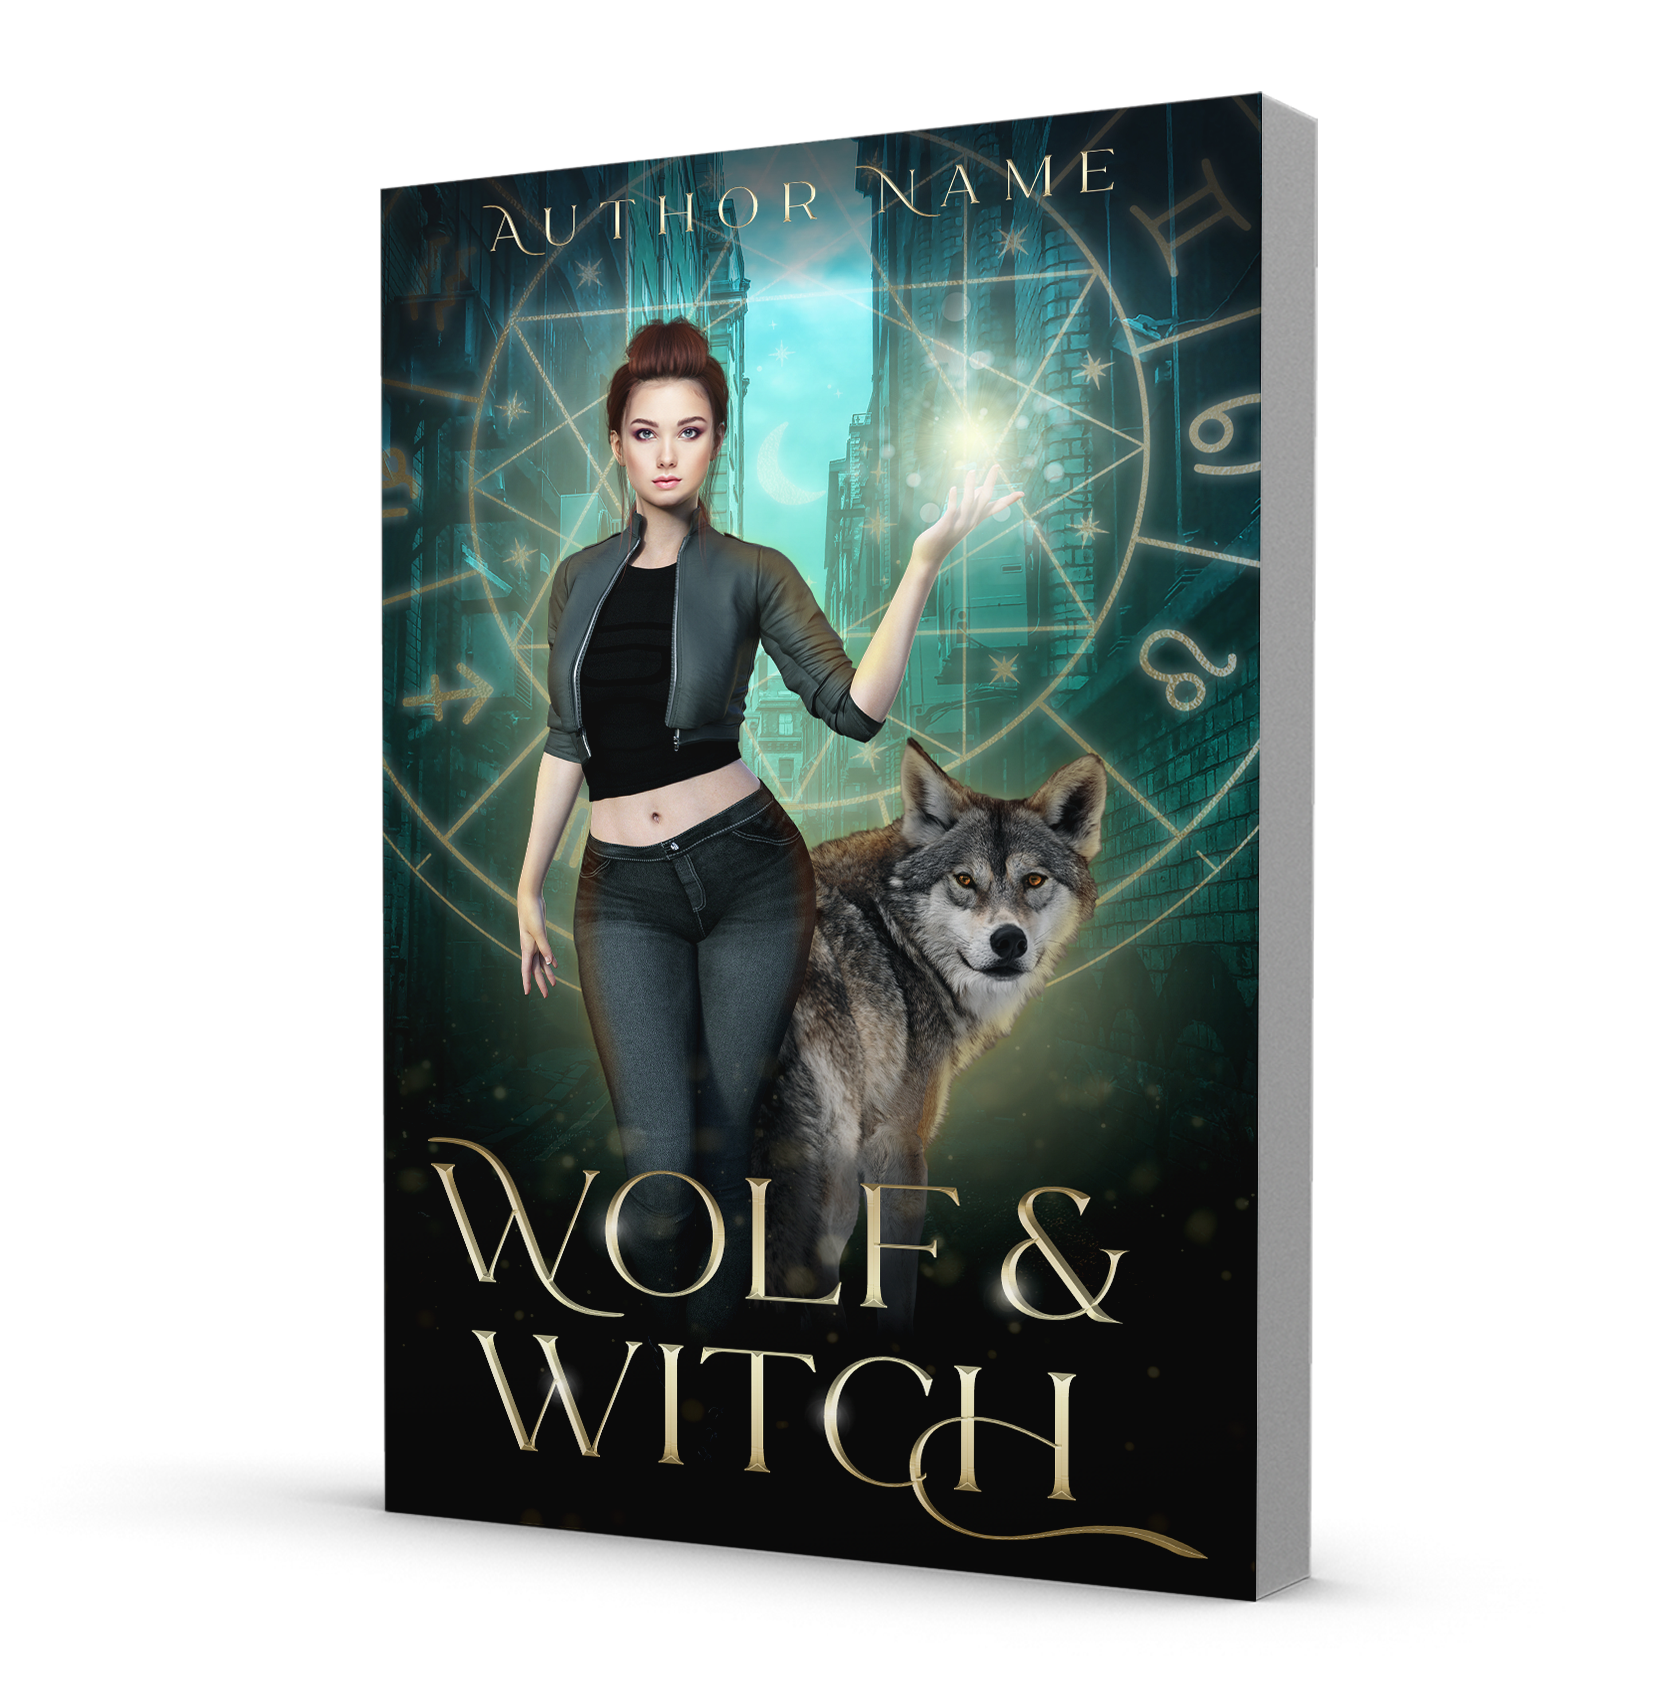 A paranormal romance book cover showing an urban witch holding a ball of magic with a wolf shifter companion.